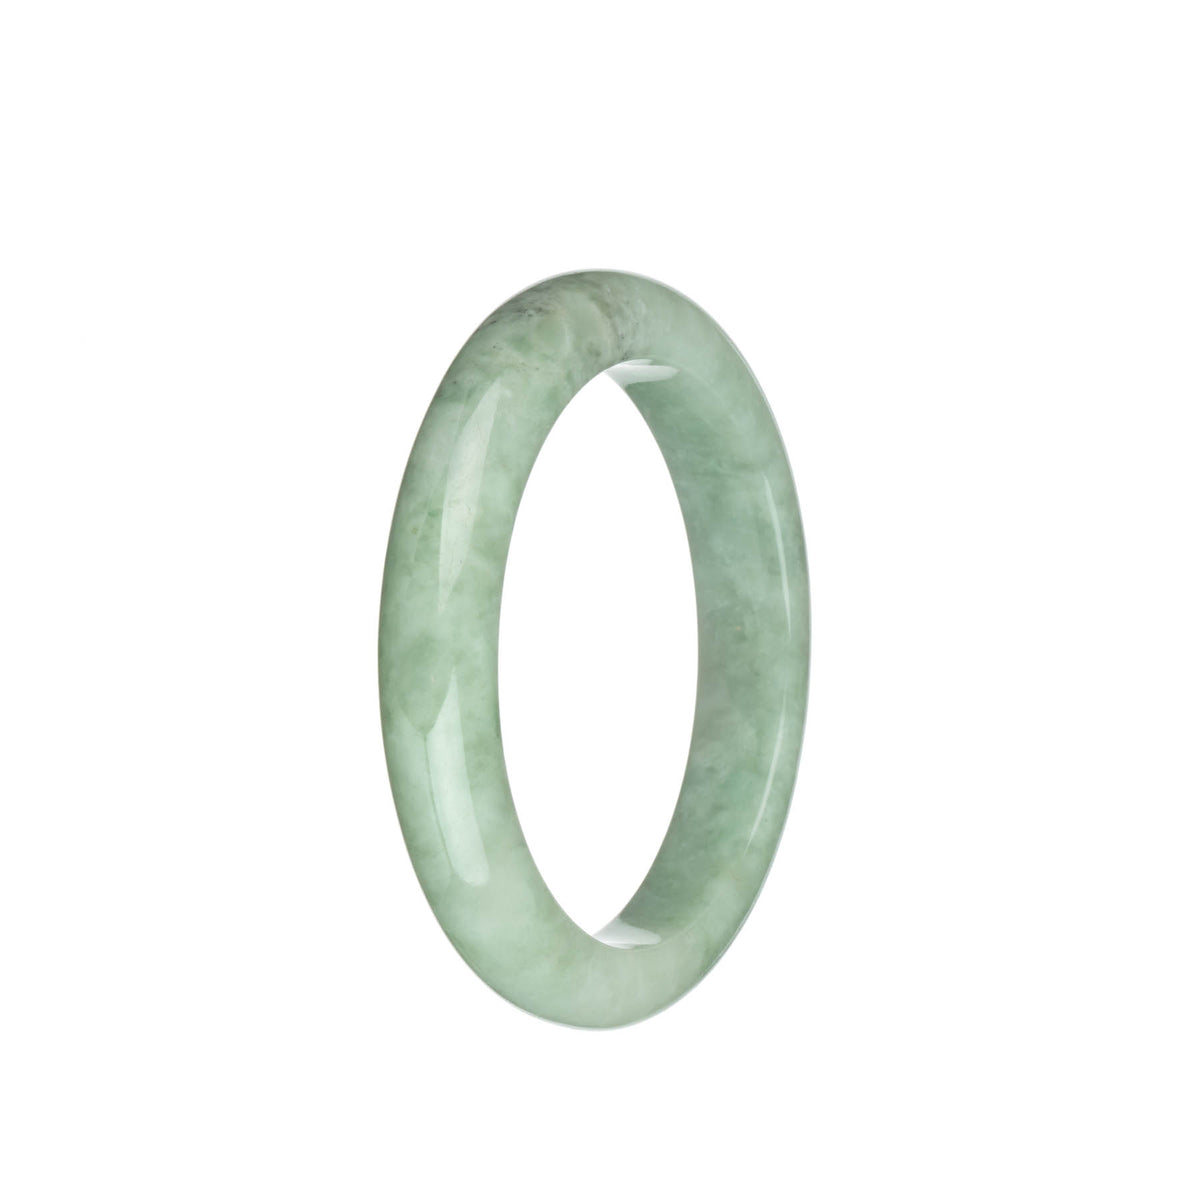 Genuine Grade A Light Green with Grey Patch Traditional Jade Bracelet - 56mm Half Moon